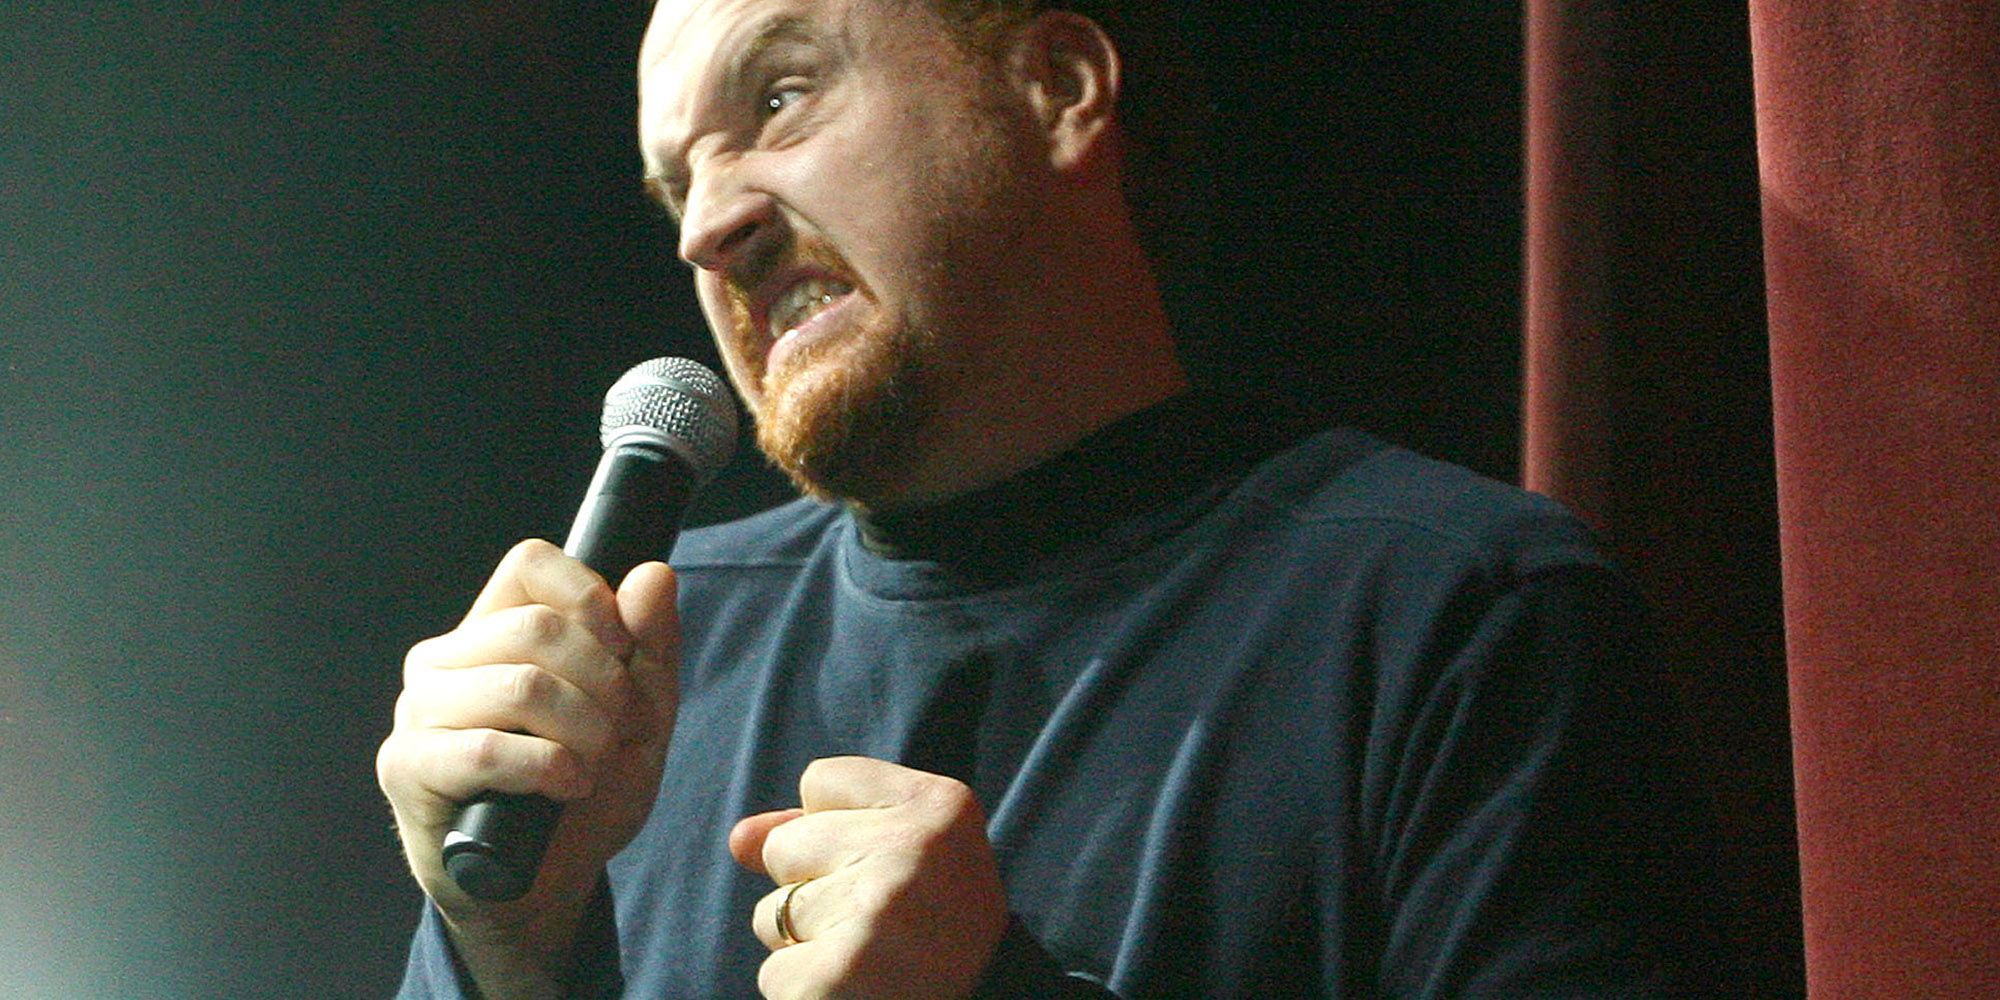 Louis C.K. Returns to Stand-Up with Surprise New York Performance